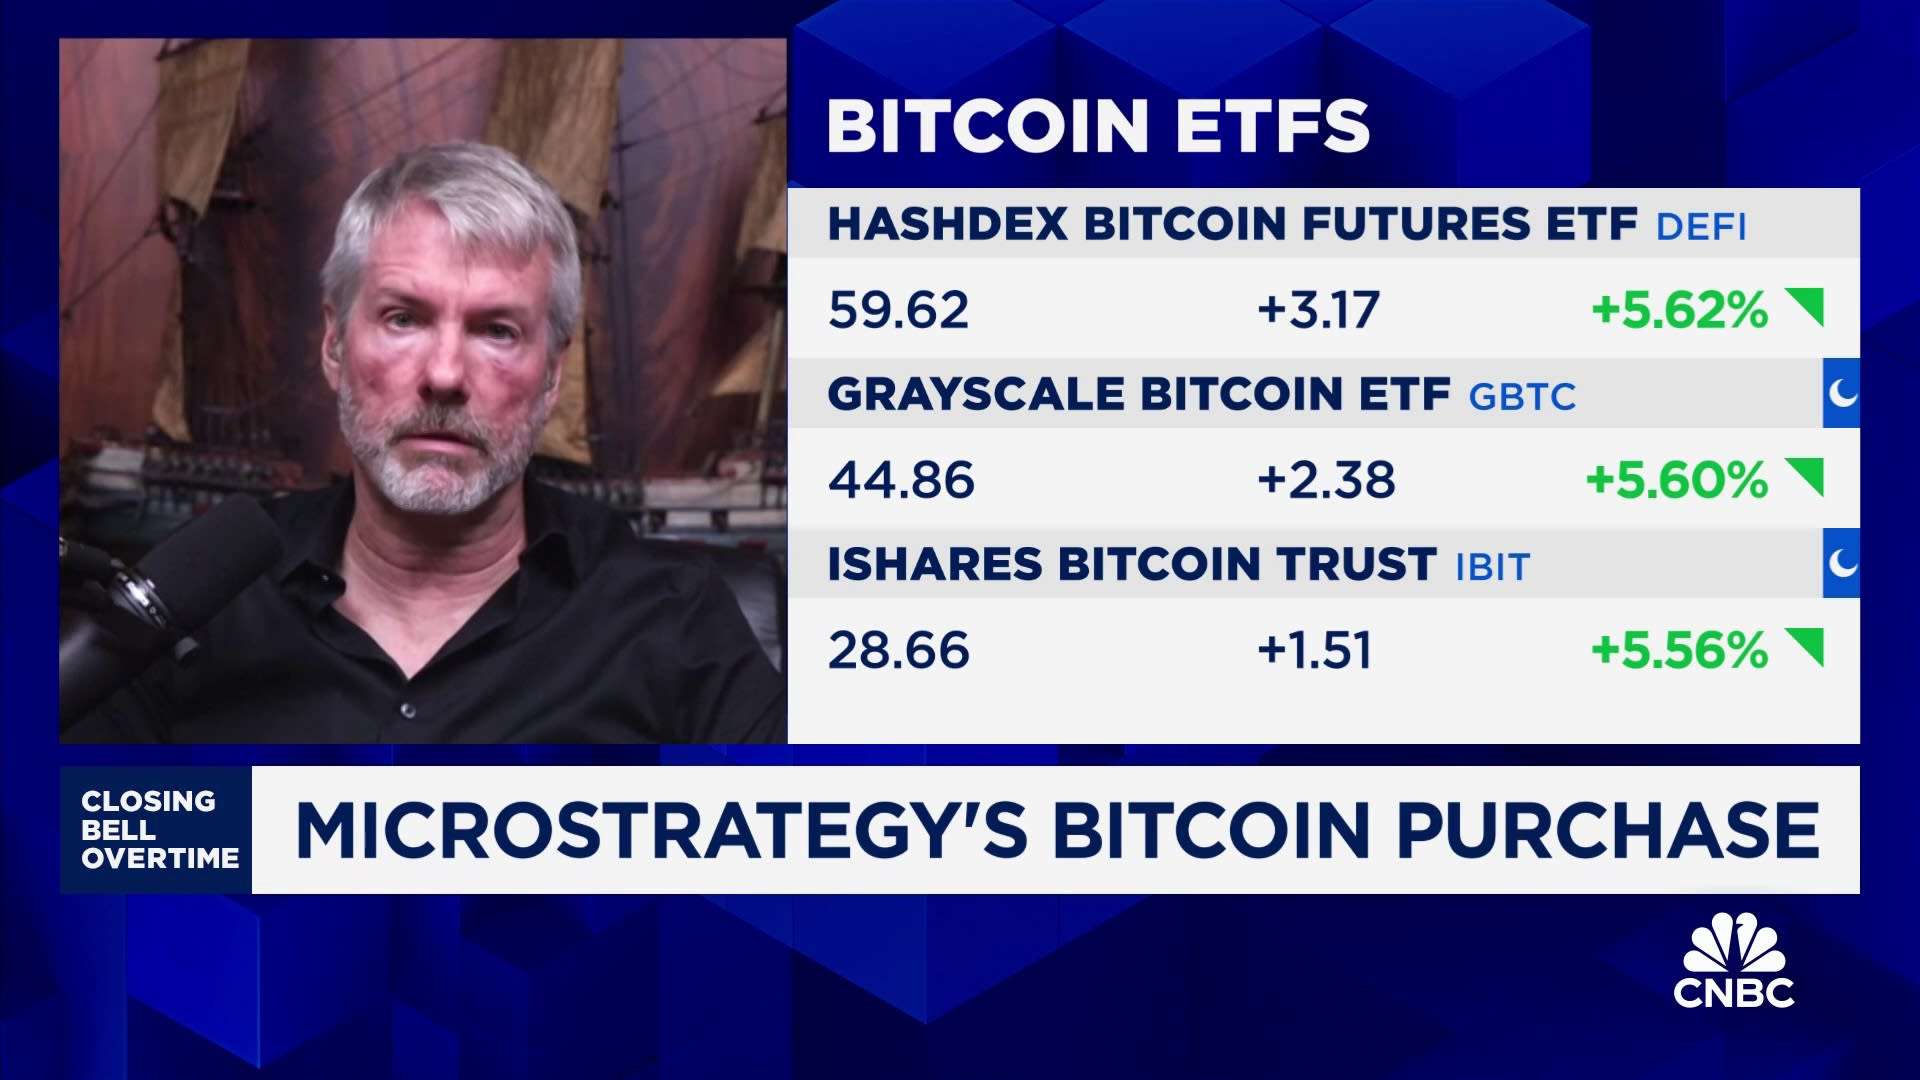 MicroStrategy Co-Founder Michael Saylor: There's 10 years of pent up demand for these bitcoin ETFs